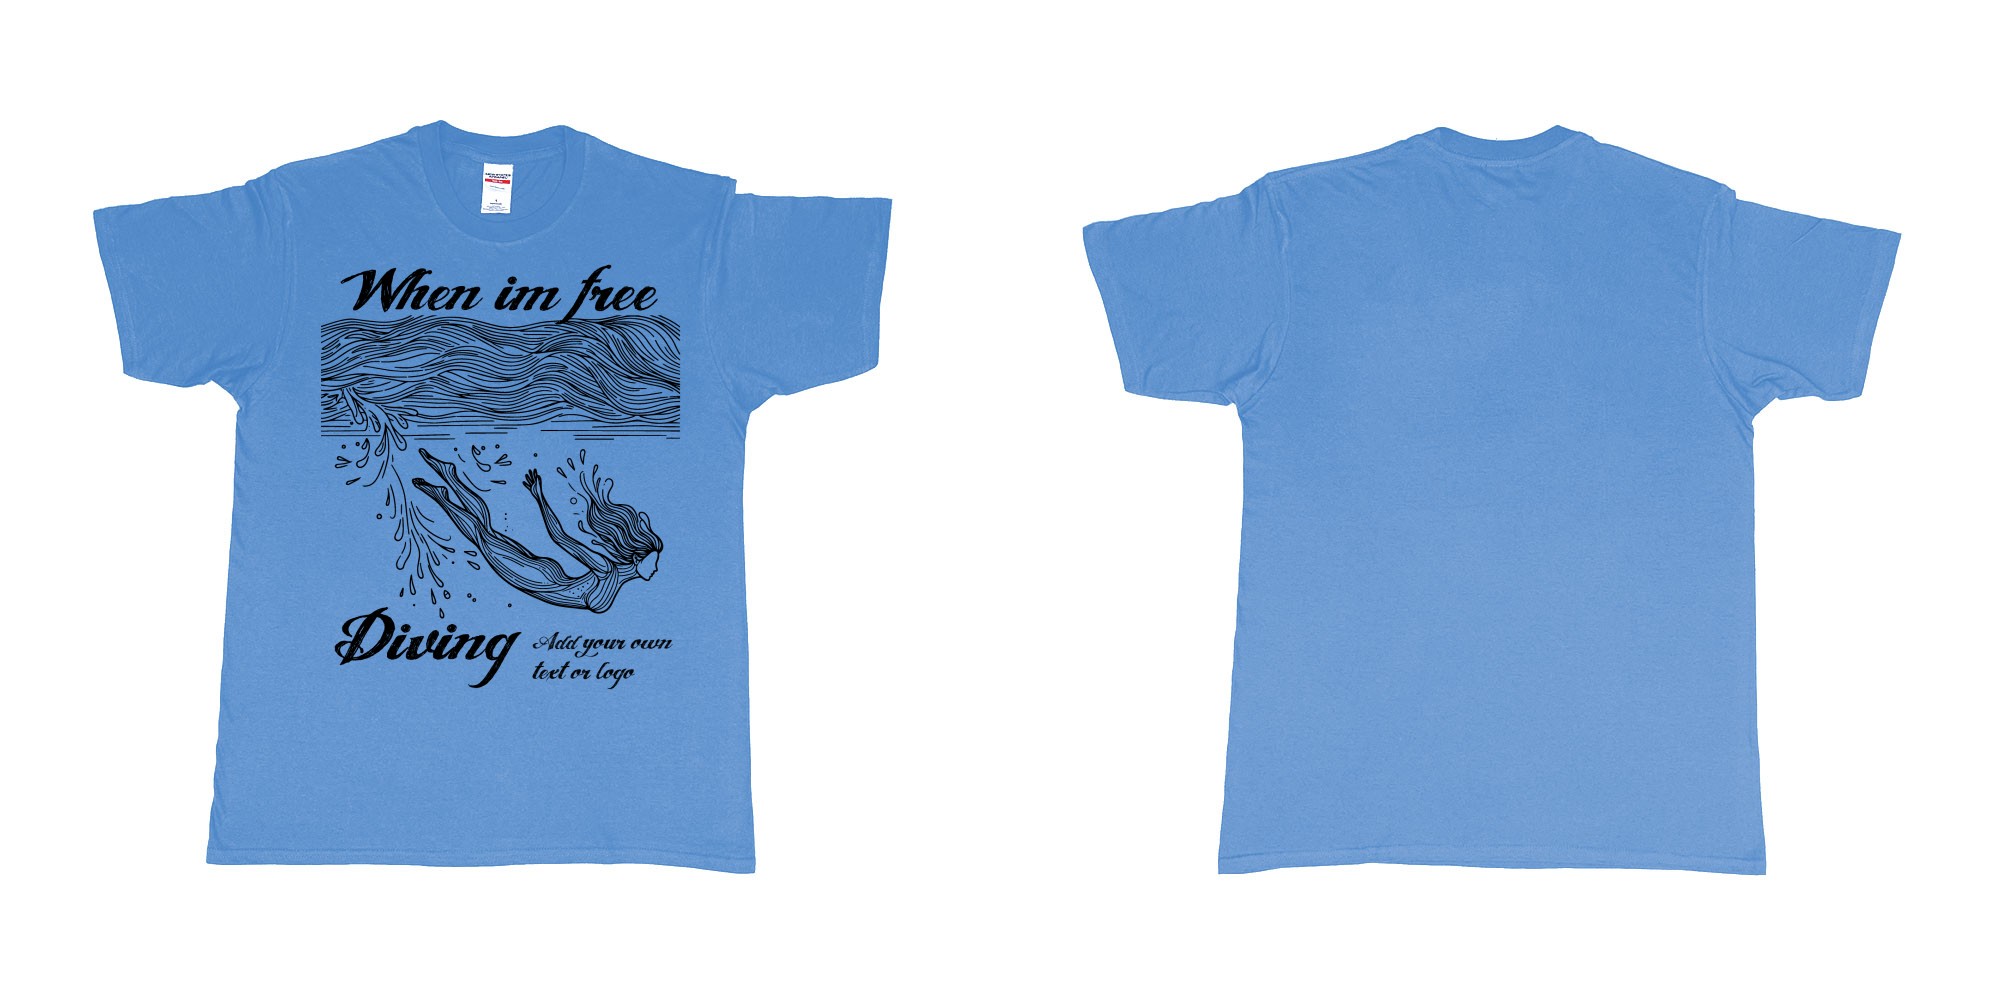 Custom tshirt design when im free diving add own text or logo in fabric color carolina-blue choice your own text made in Bali by The Pirate Way